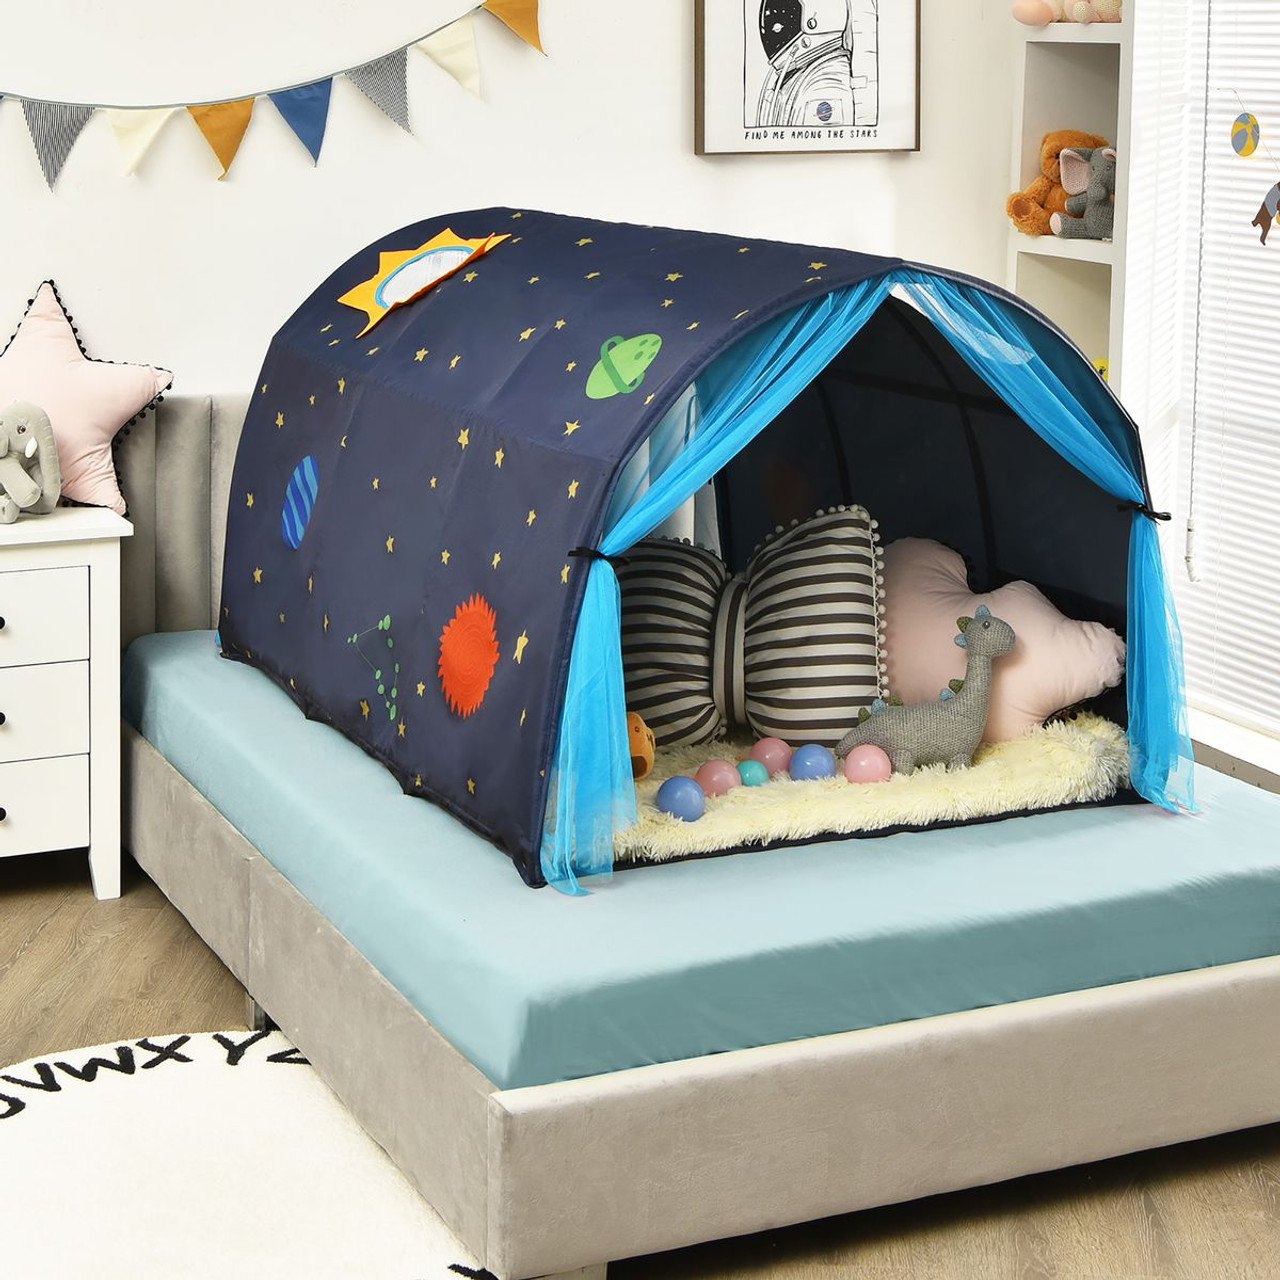 Costway Kids Bed Tent Playhouse with Carry Bag product image